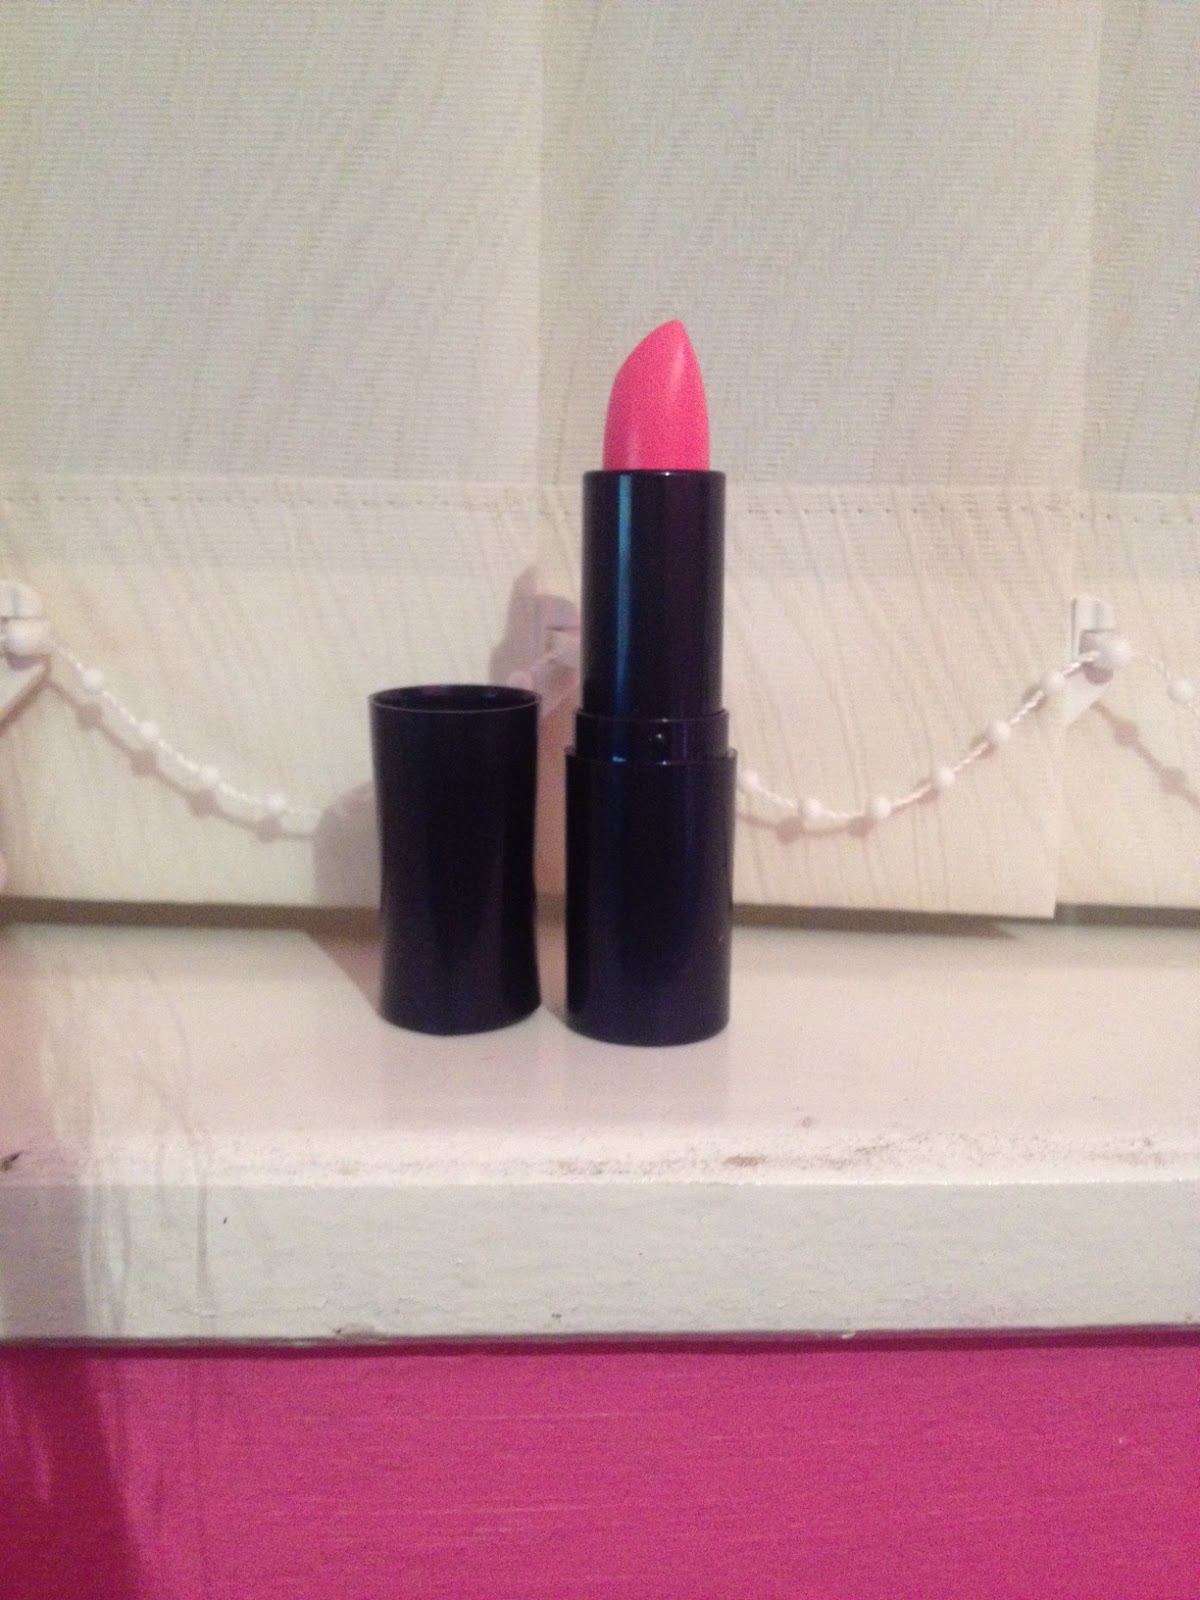 The Princess Of London Pink Miss Sporty Perfect Colour Lipstick